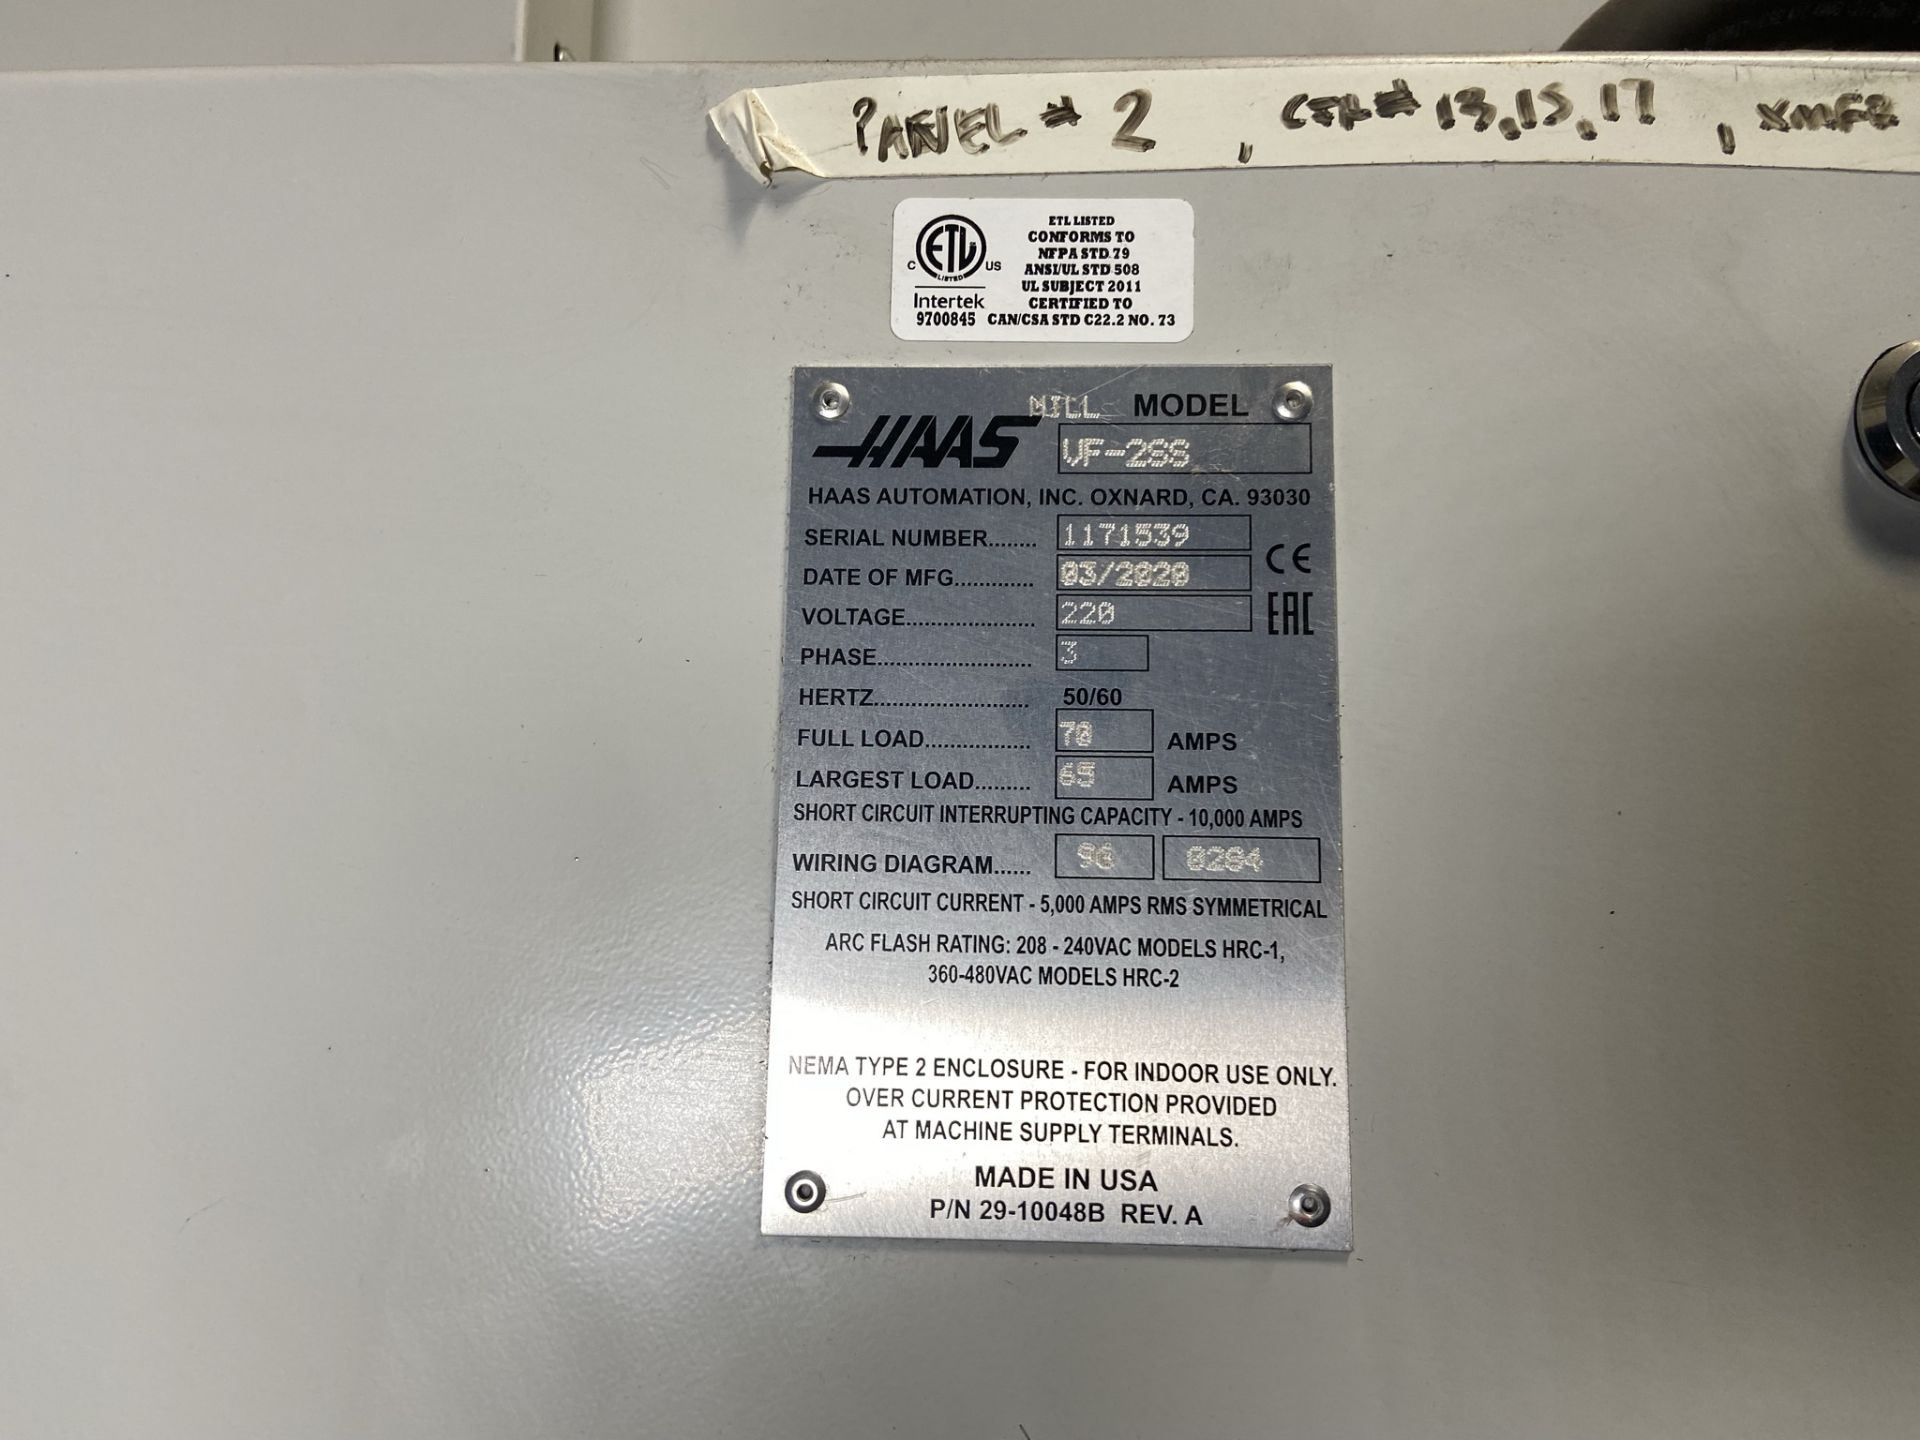 2020 HAAS VF-2SS 4-Axis CNC Vertical Machining Center - Image 12 of 12